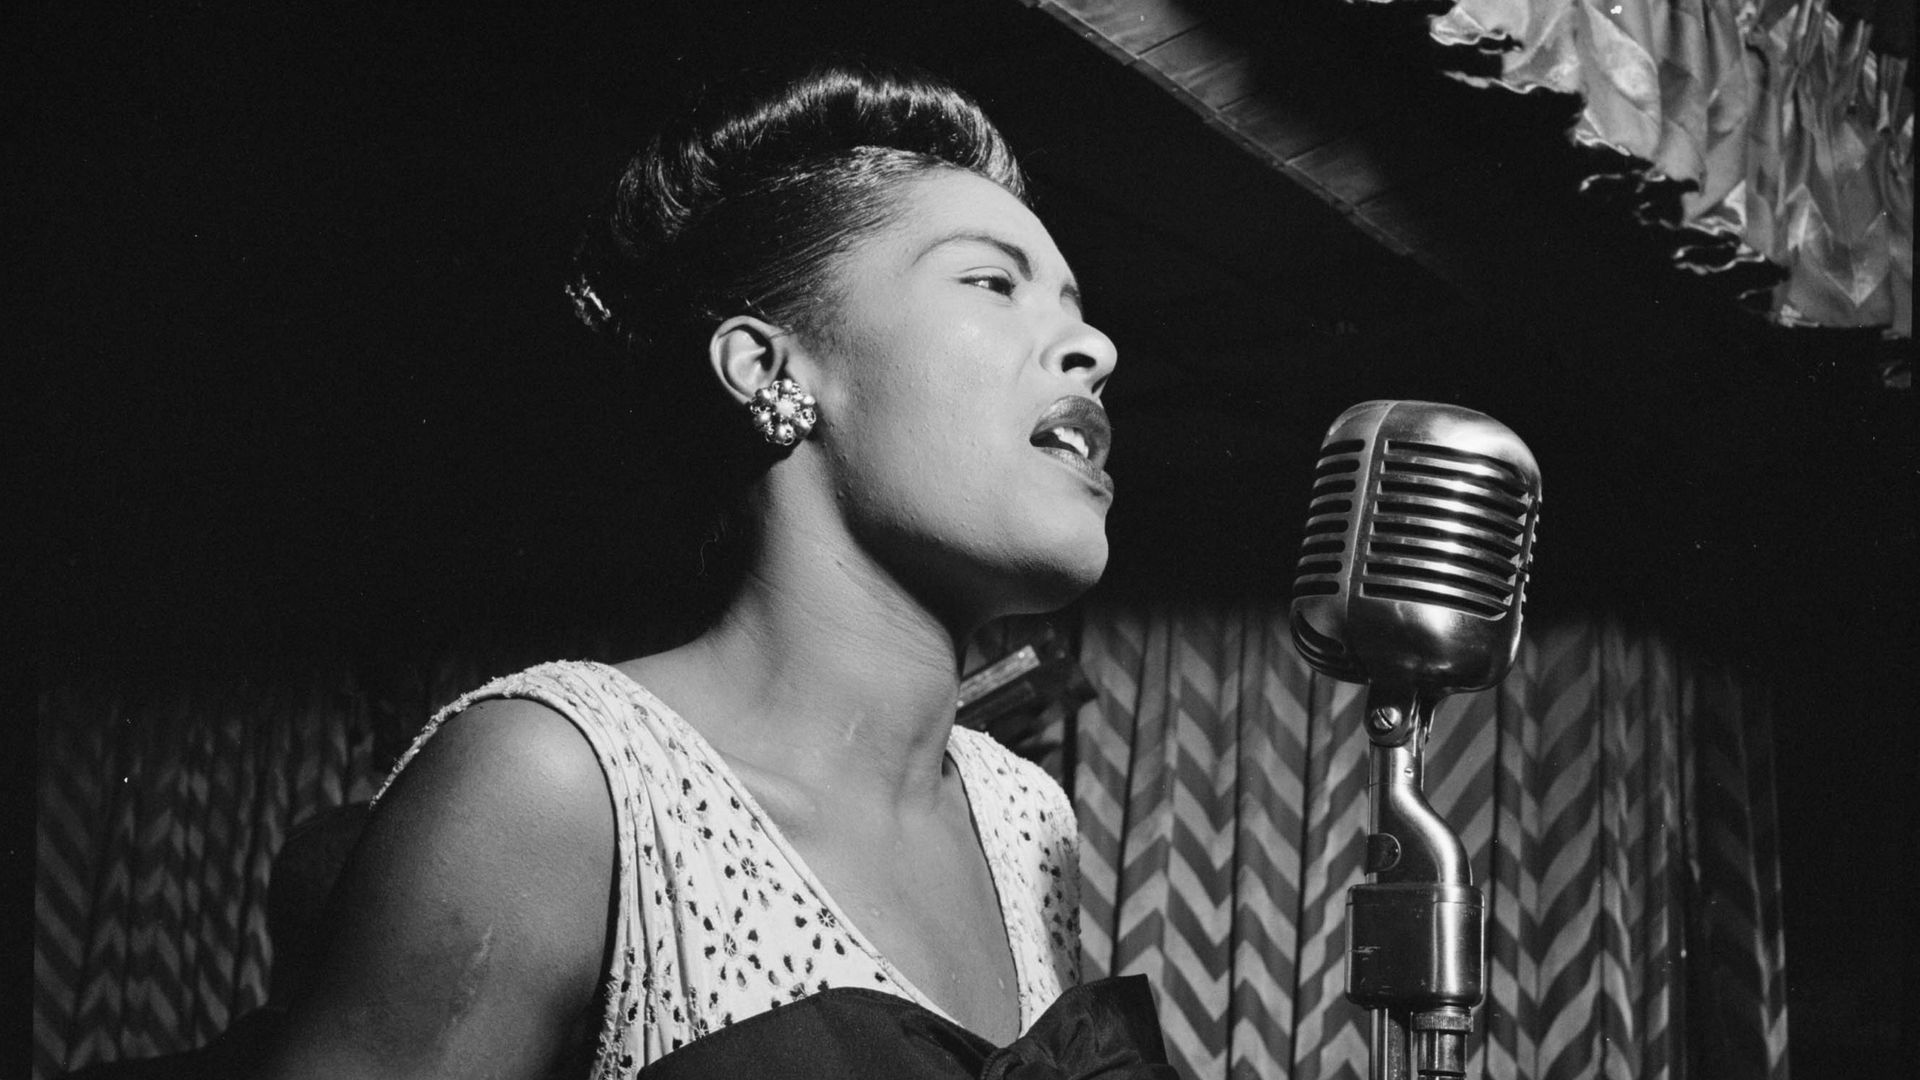 American jazz singer Billie Holiday is shown performing at the Club Downbeat in Manhattan in February 1947.